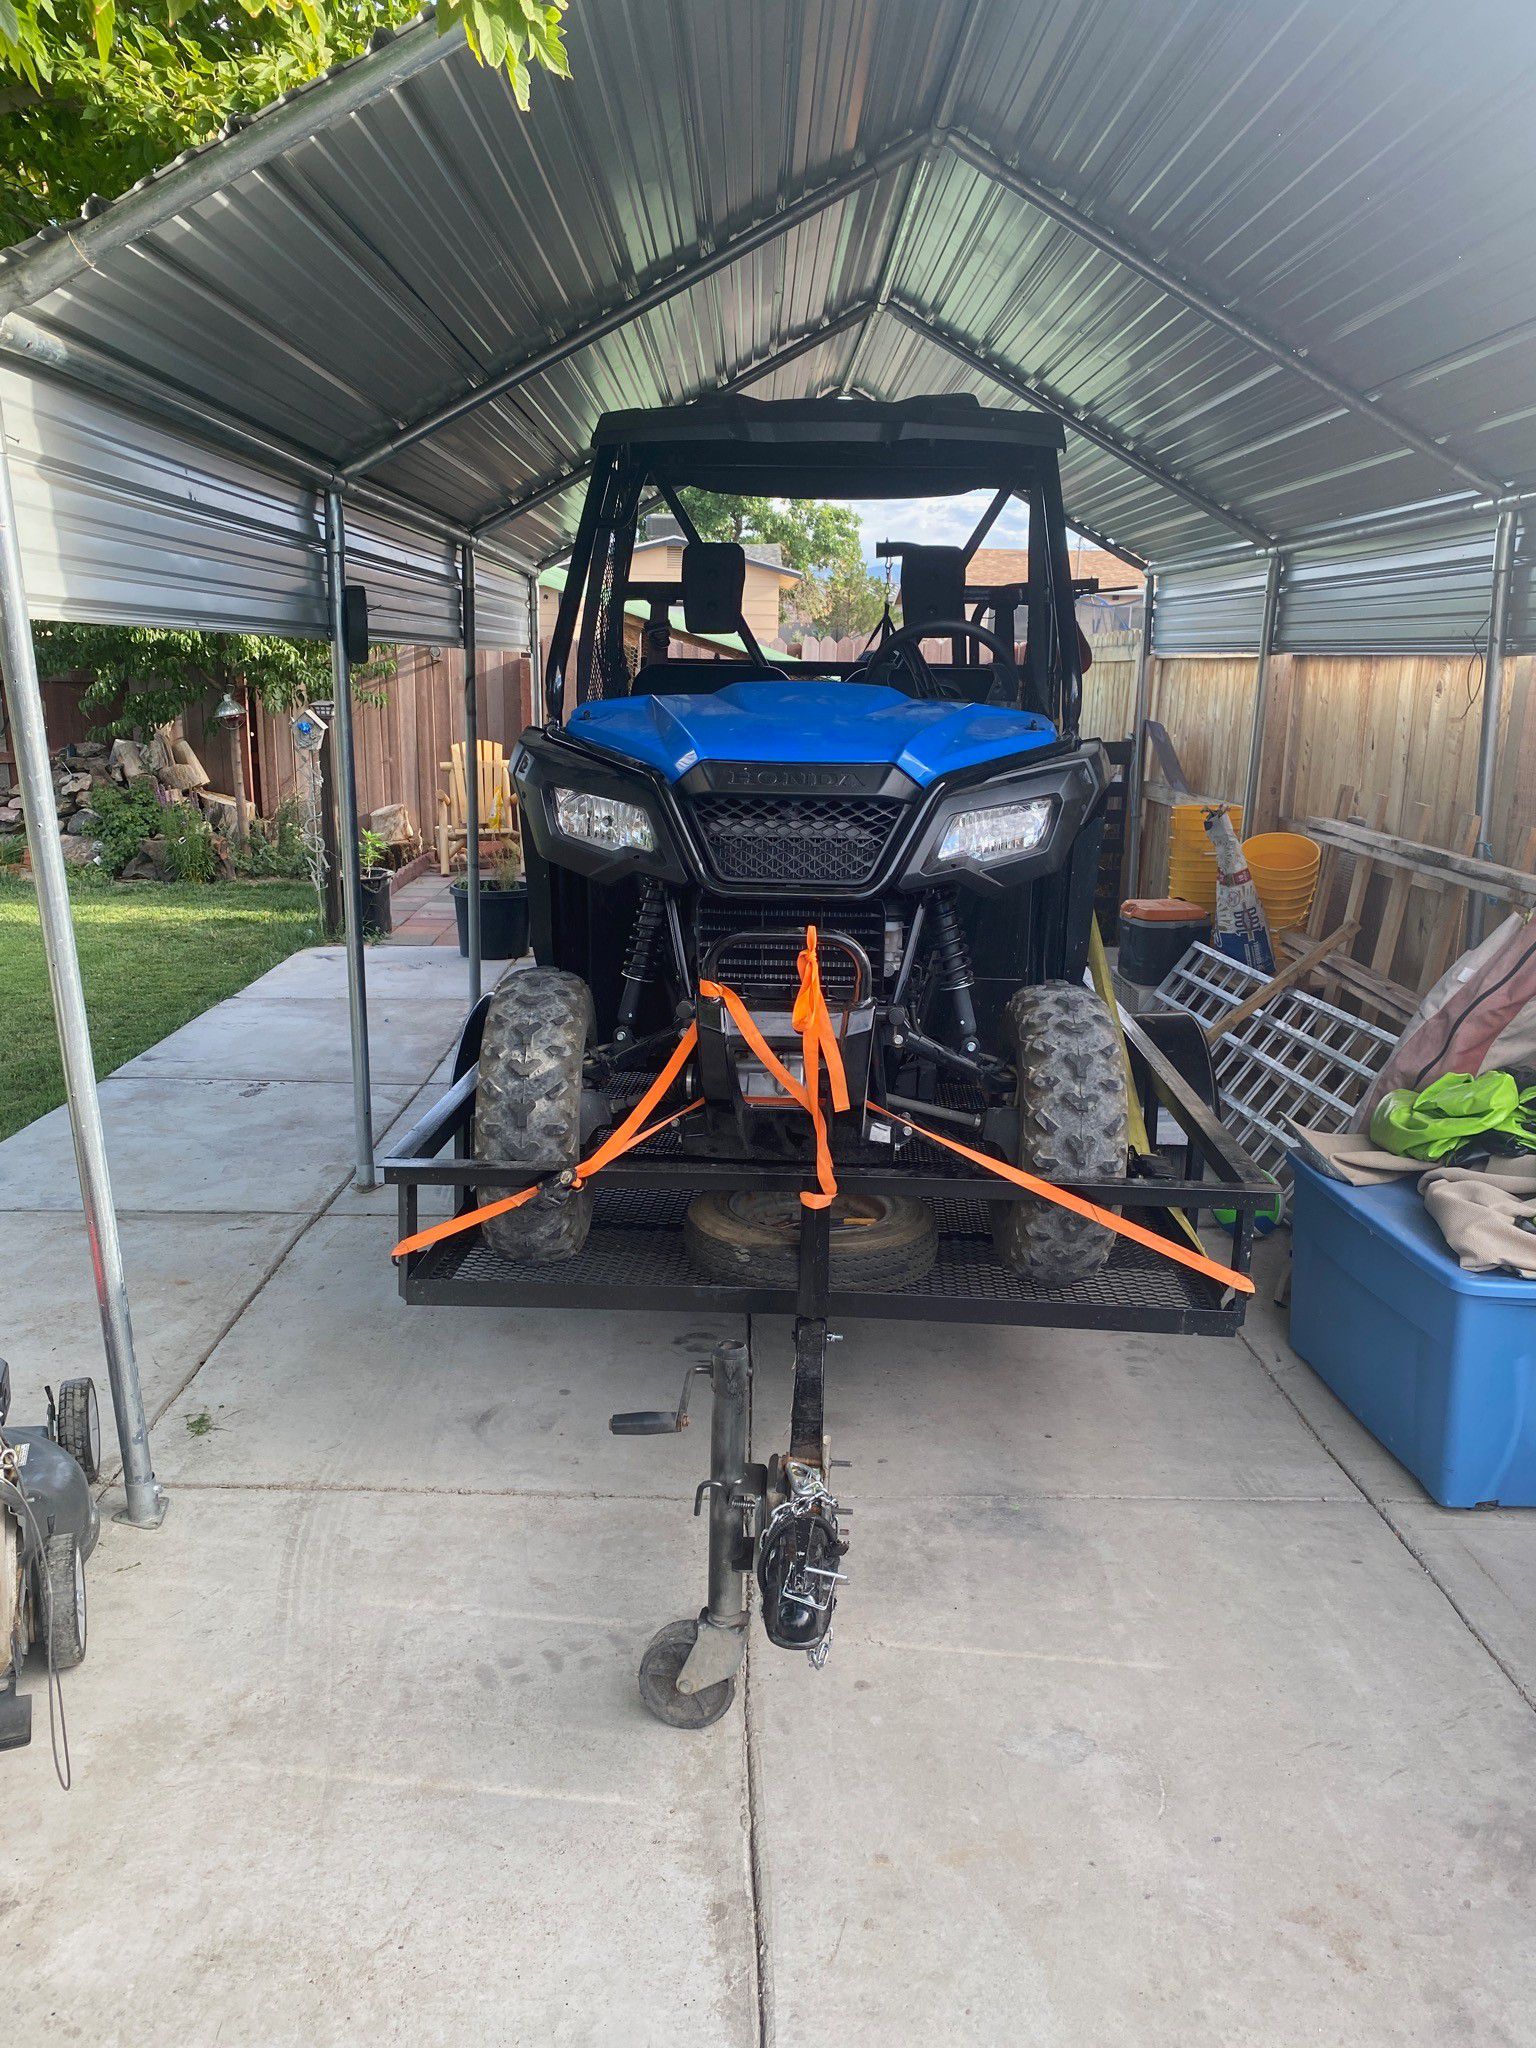 2016 Honda pioneer with 200 miles on it in a 2020 trailer